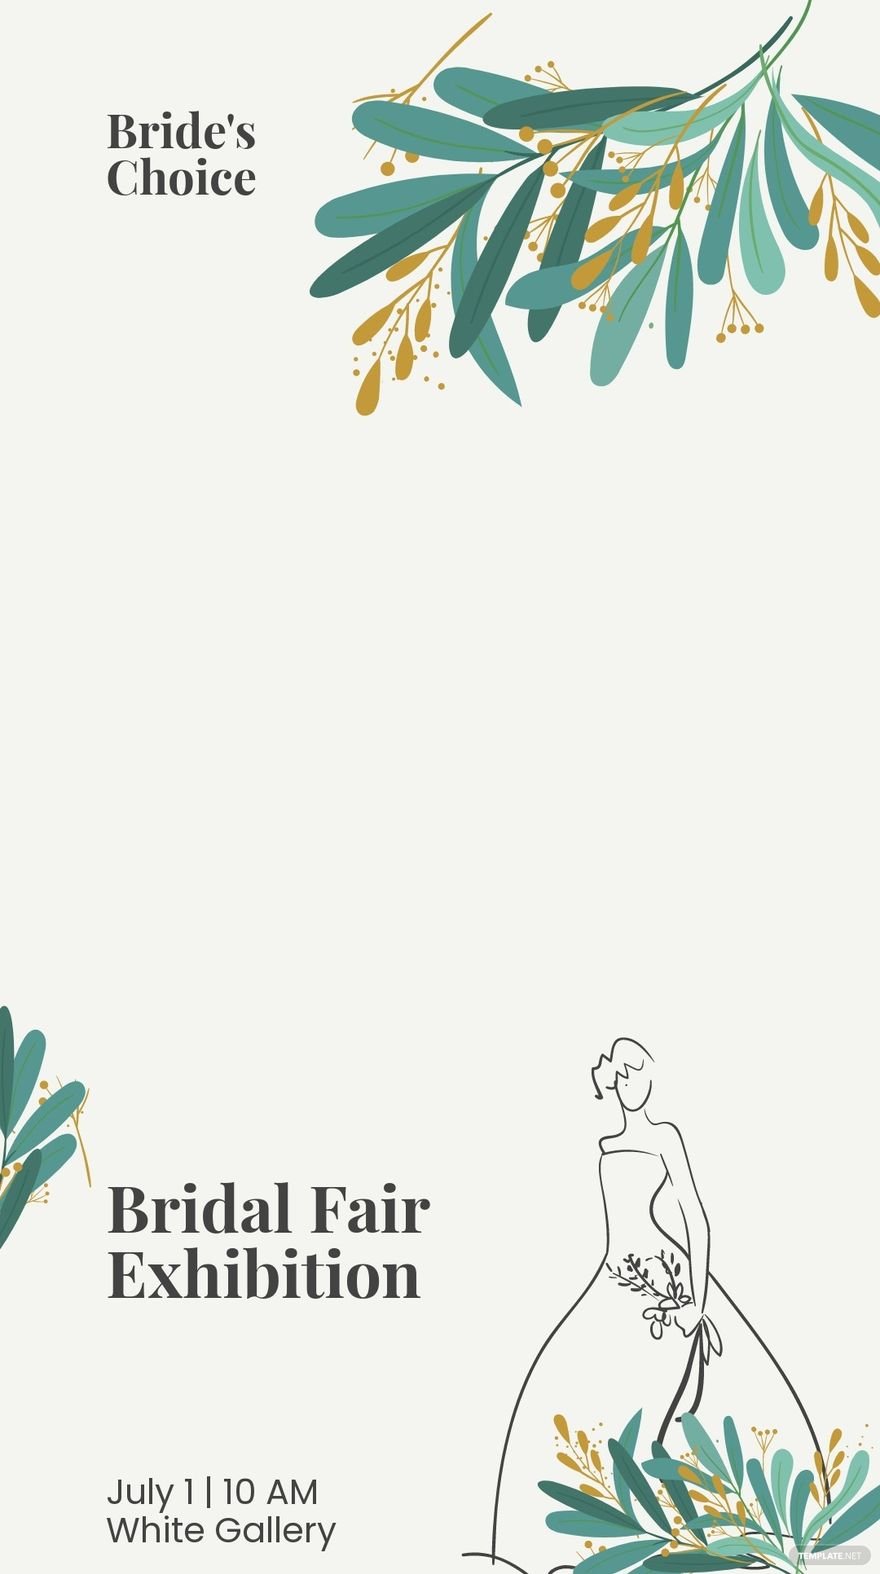 Free Bridal Fair Exhibition Snapchat Geofilter Template